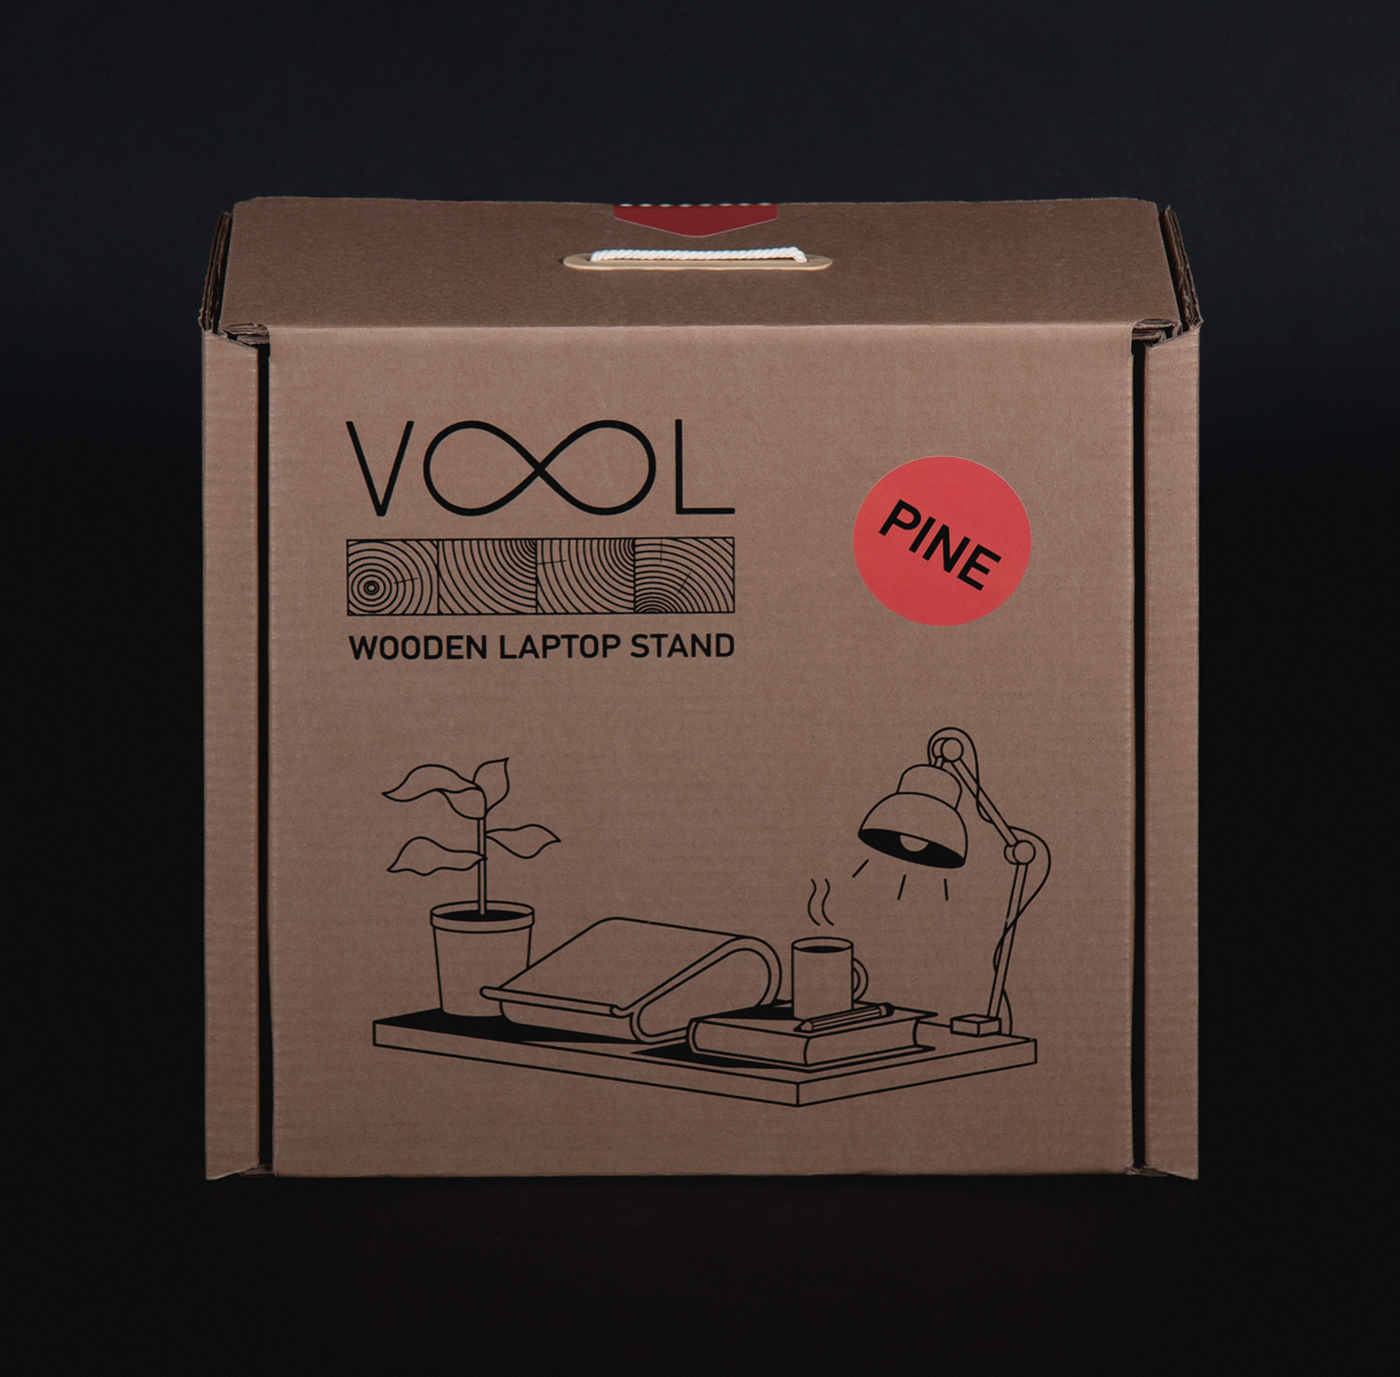 vool Wooden laptop stand